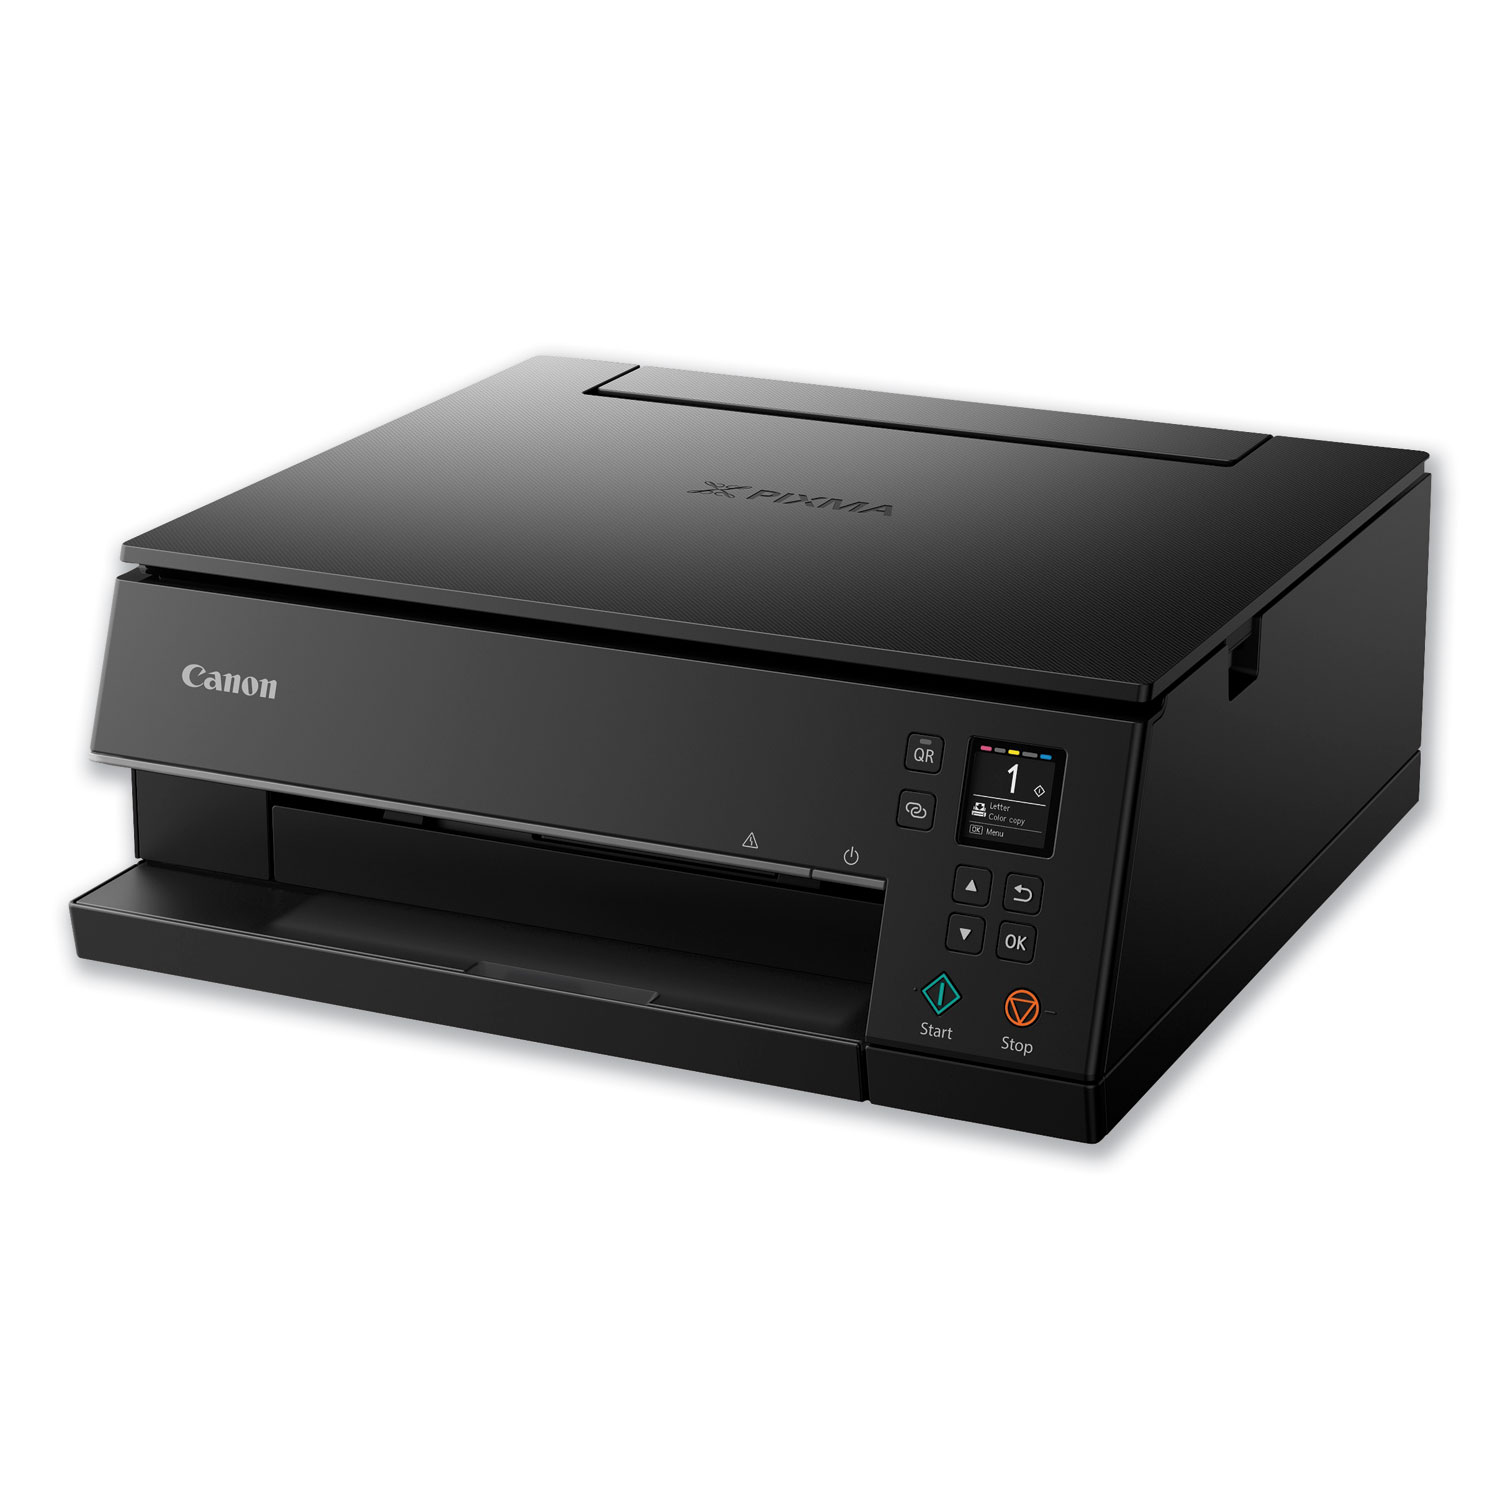  Canon 3774C002 PIXMA TS6320 Wireless Inkjet All-In-One Multifunction Printer, Copy/Print/Scan (CNM3774C002) 